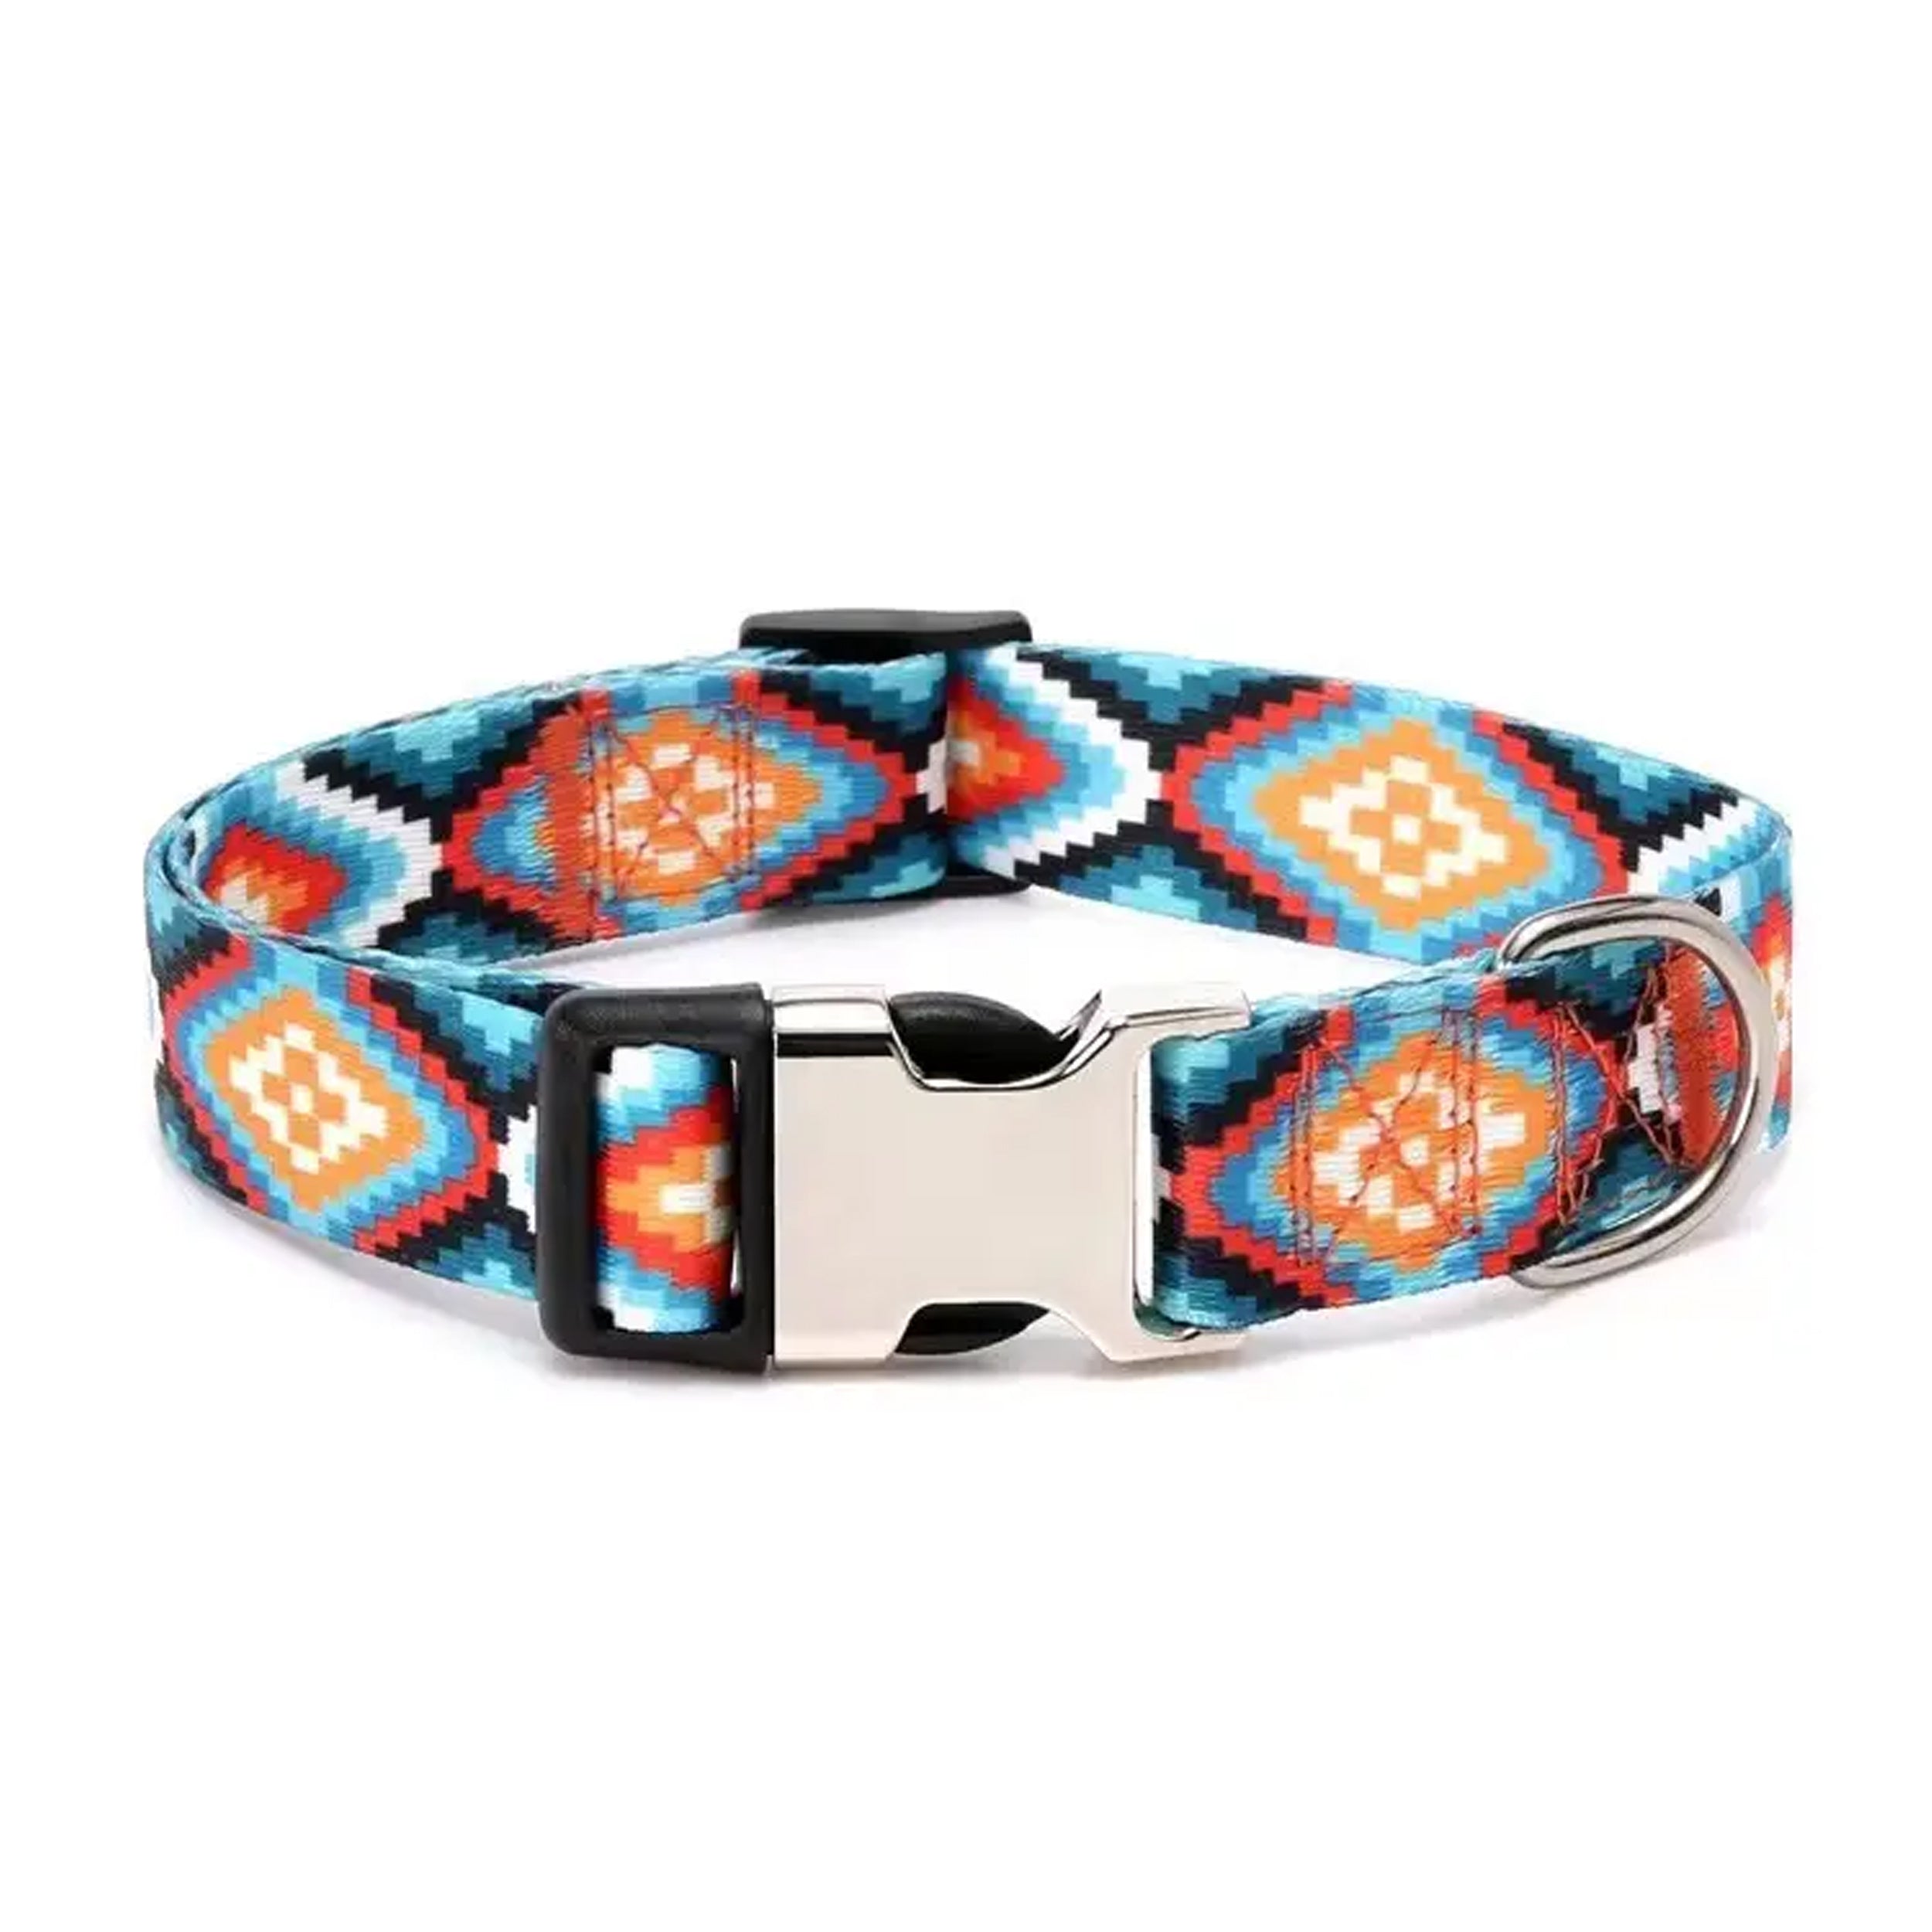 Soft Dog Collar with Metal Buckle for Comfort and Durability